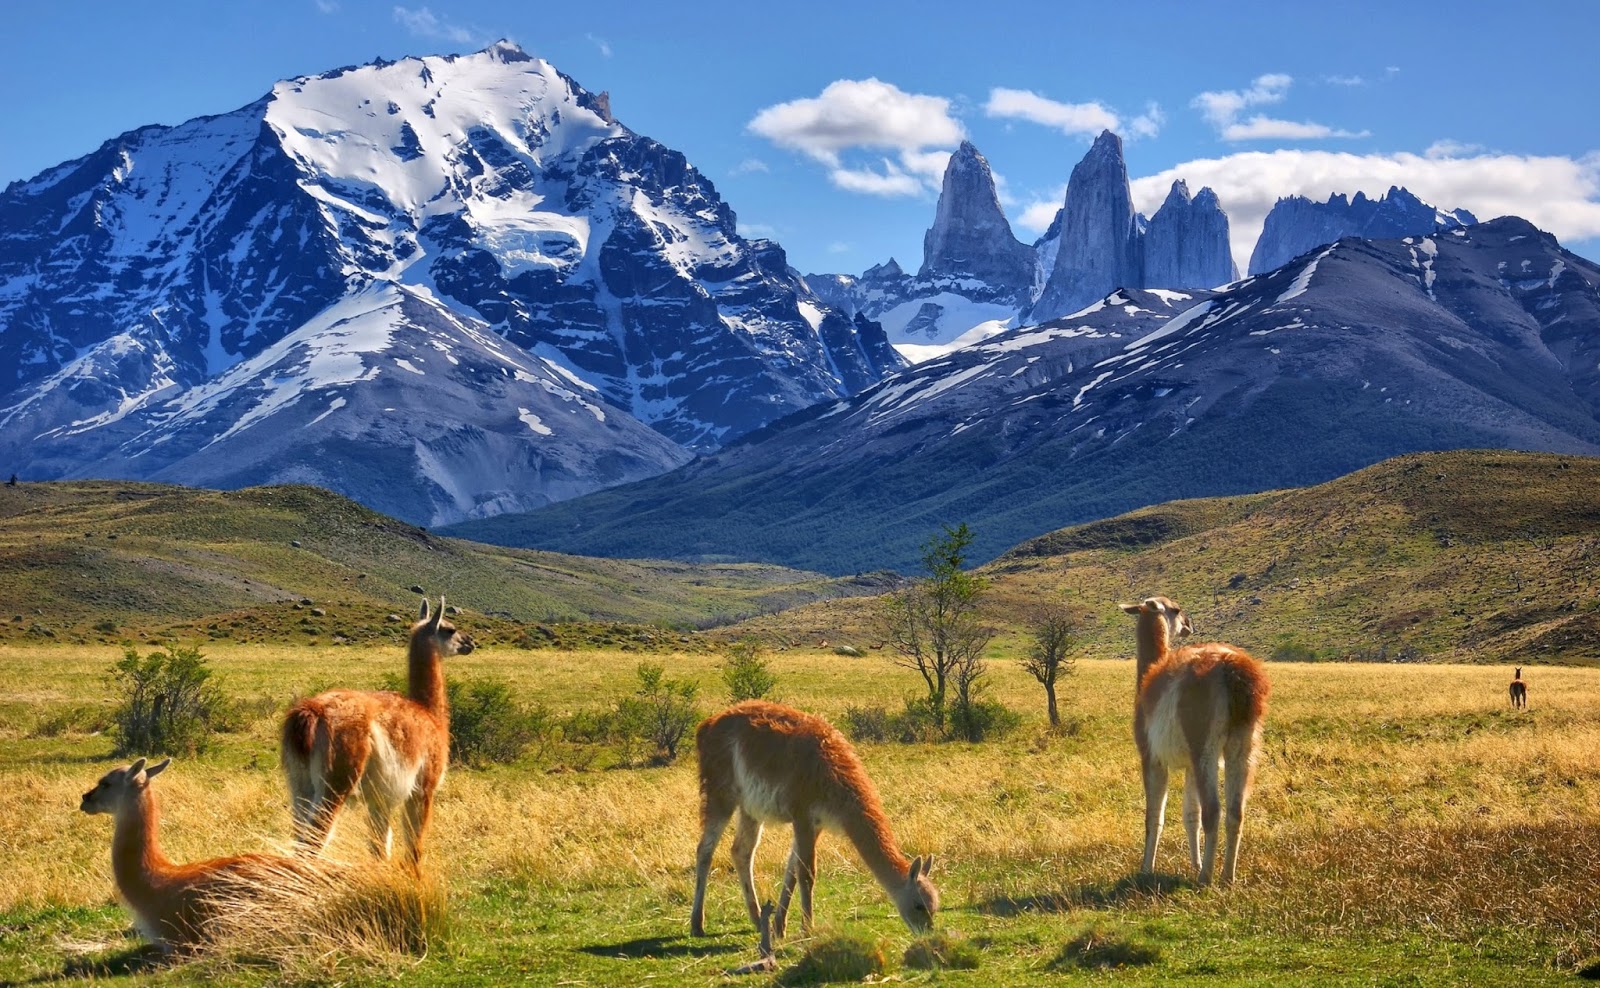 Chile Adventure Travel: A Thrilling Experience in South America